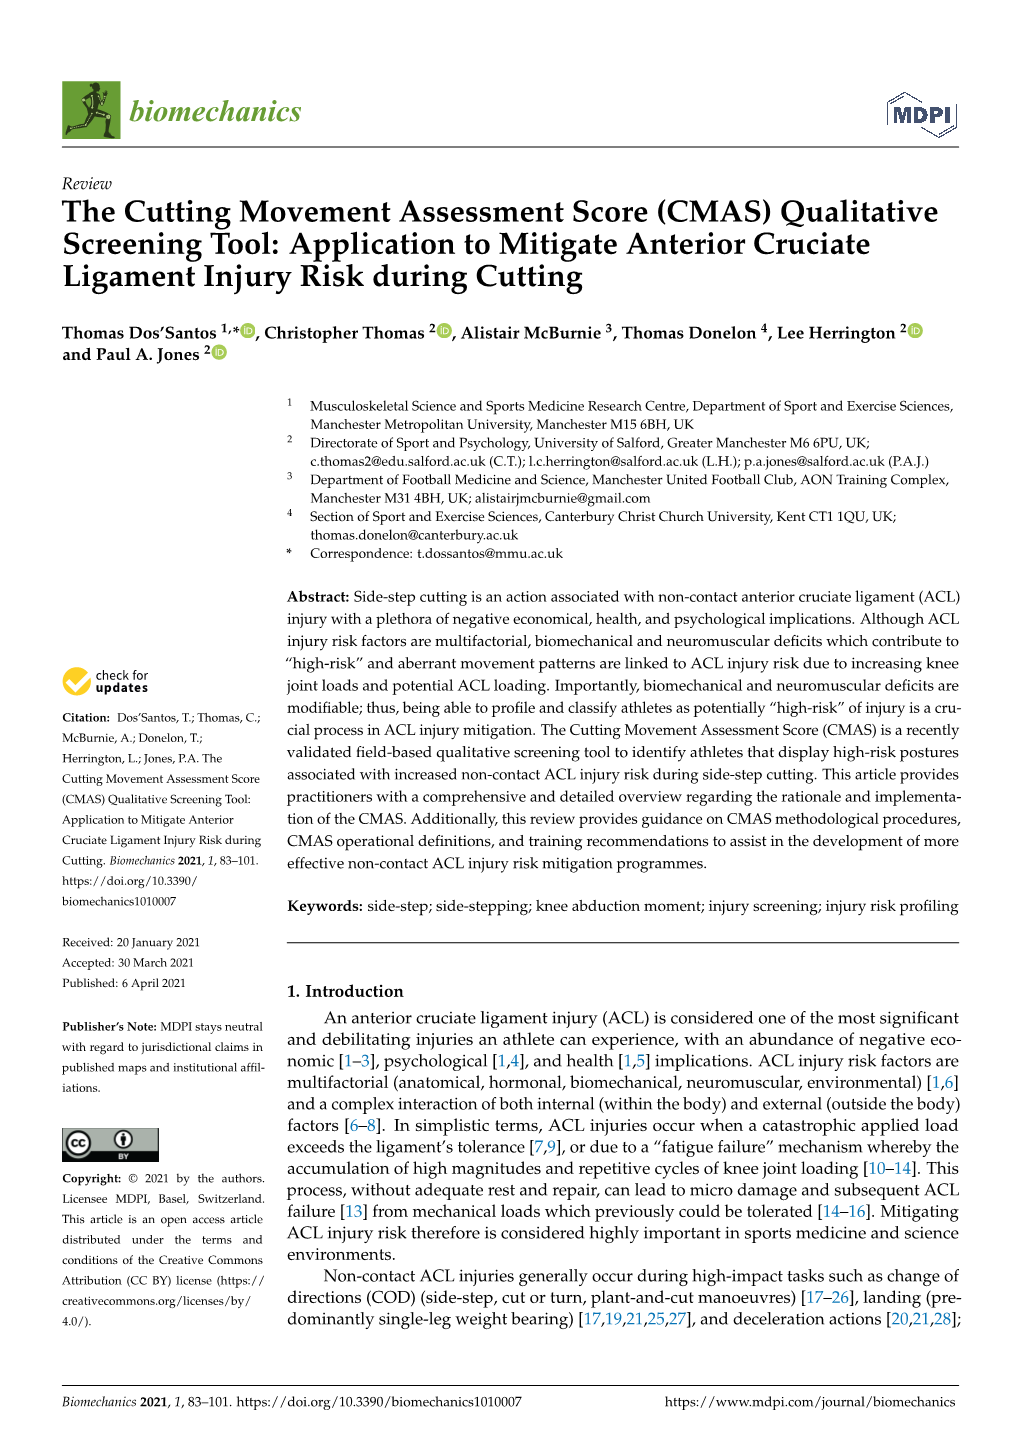 The Cutting Movement Assessment Score (CMAS) Qualitative Screening Tool: Application to Mitigate Anterior Cruciate Ligament Injury Risk During Cutting